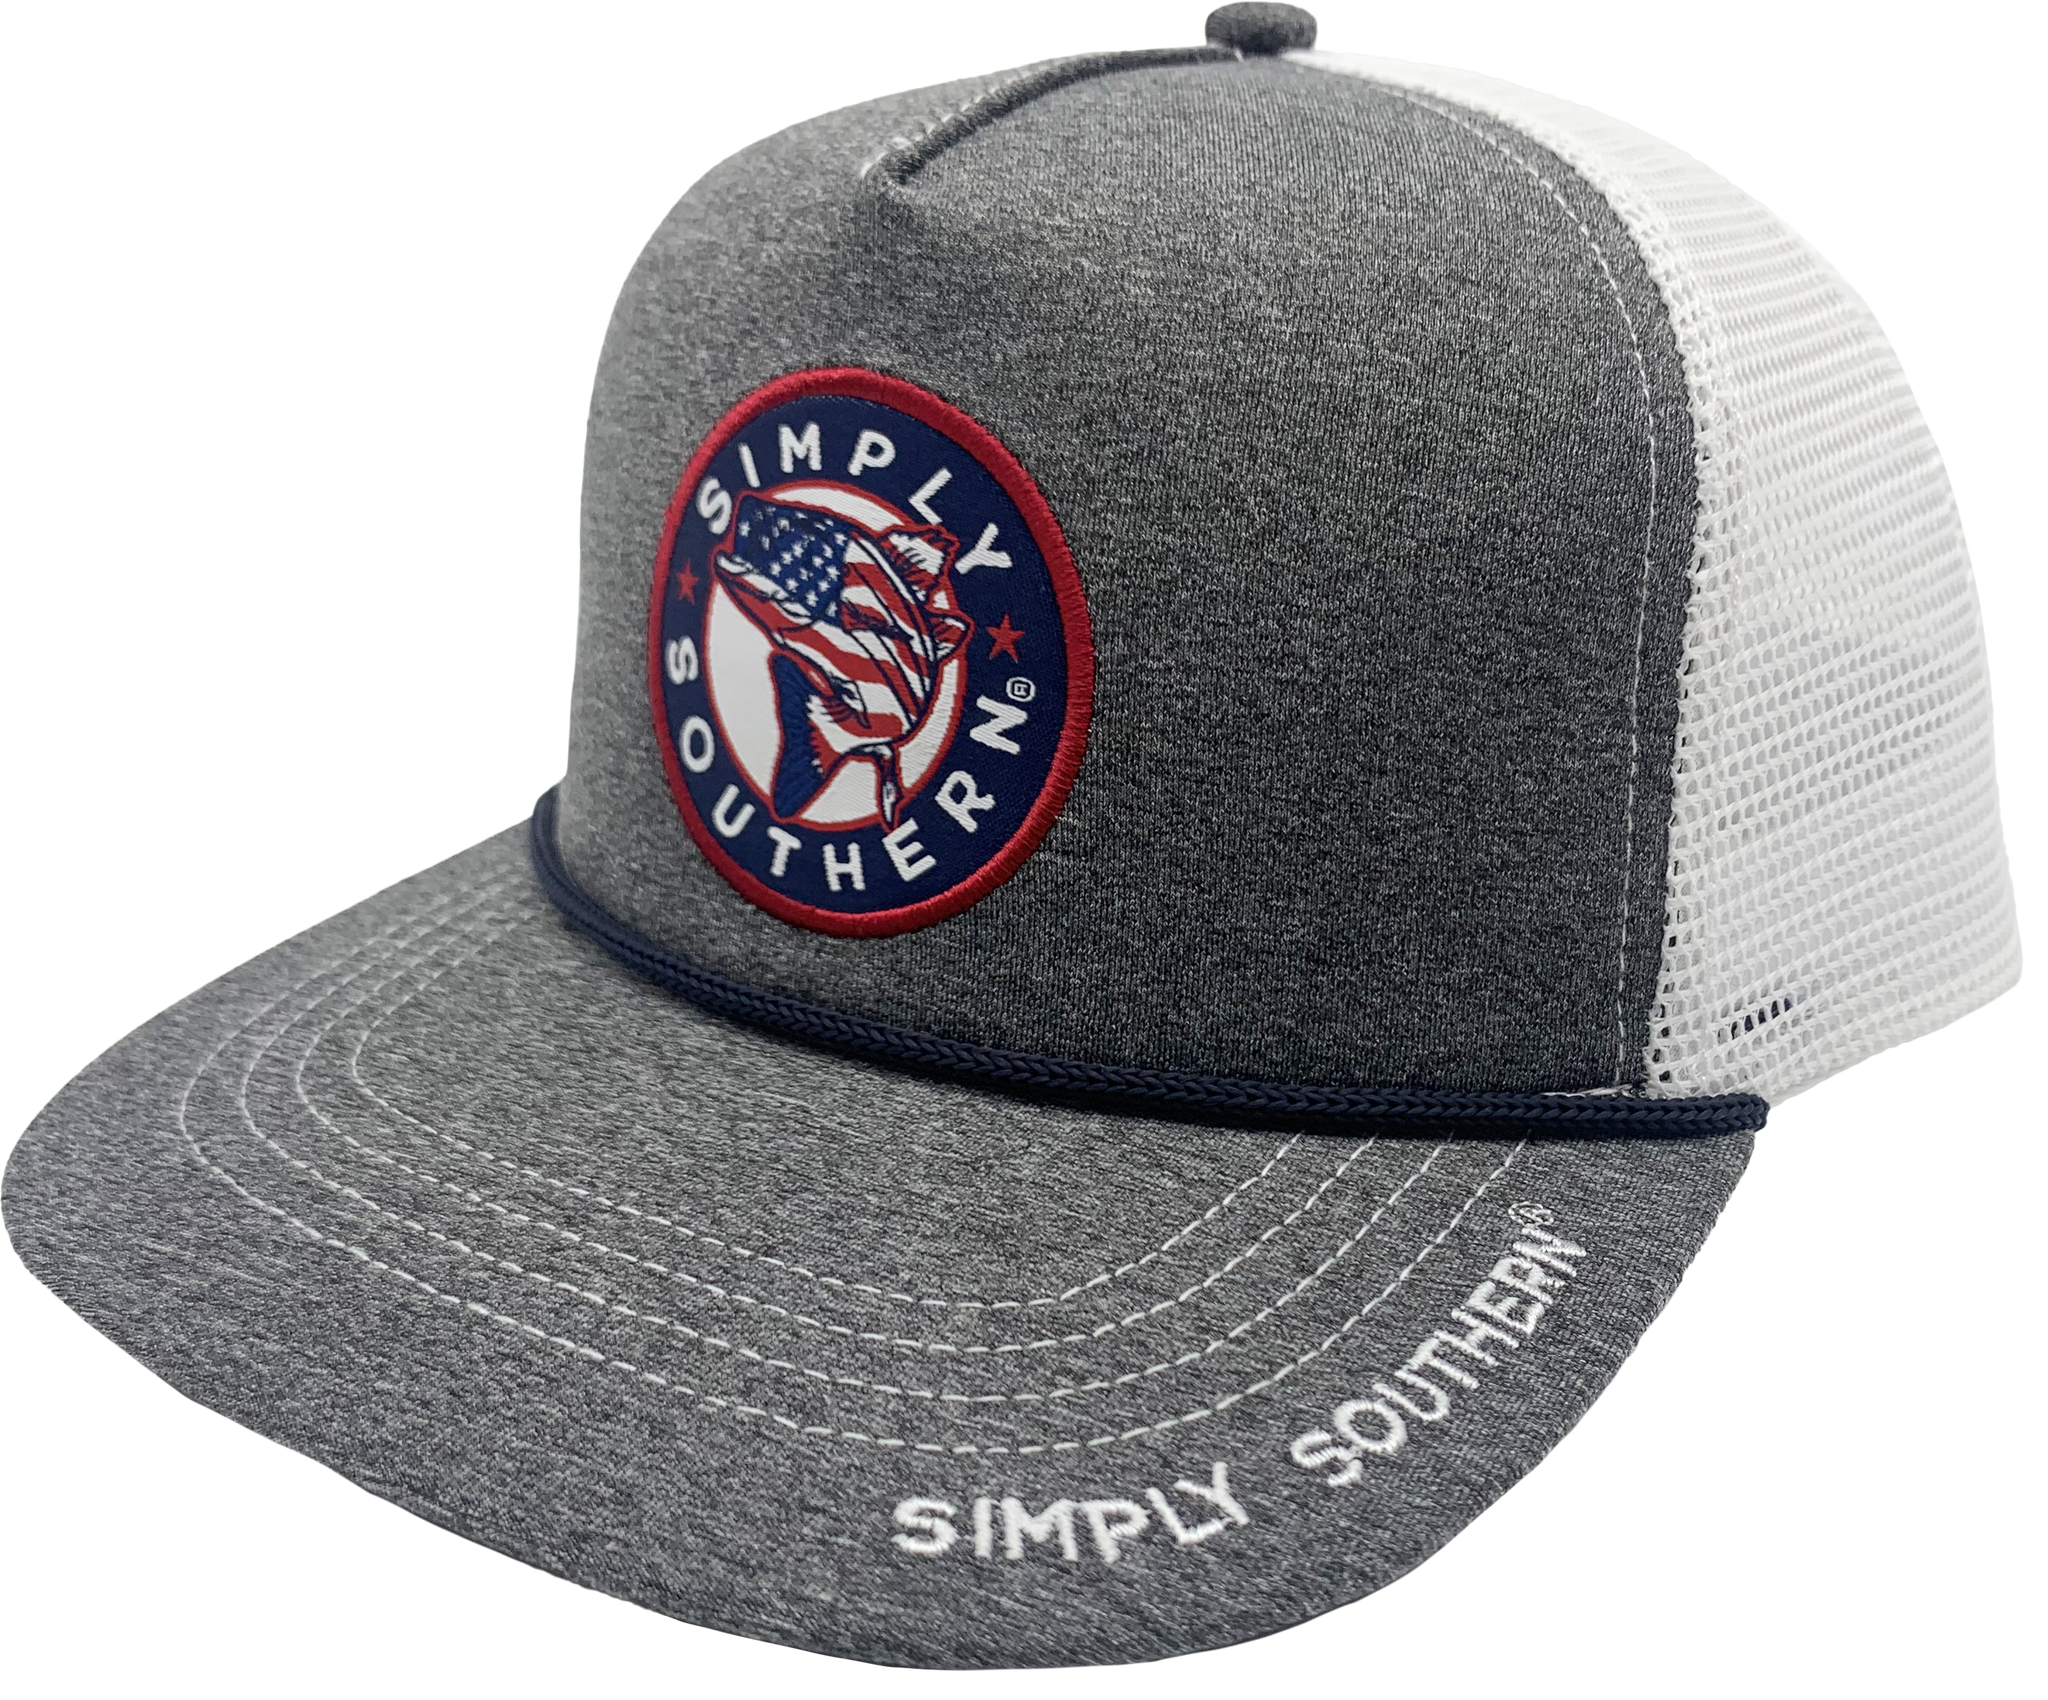 Simply Southern Trucker Hats for Men